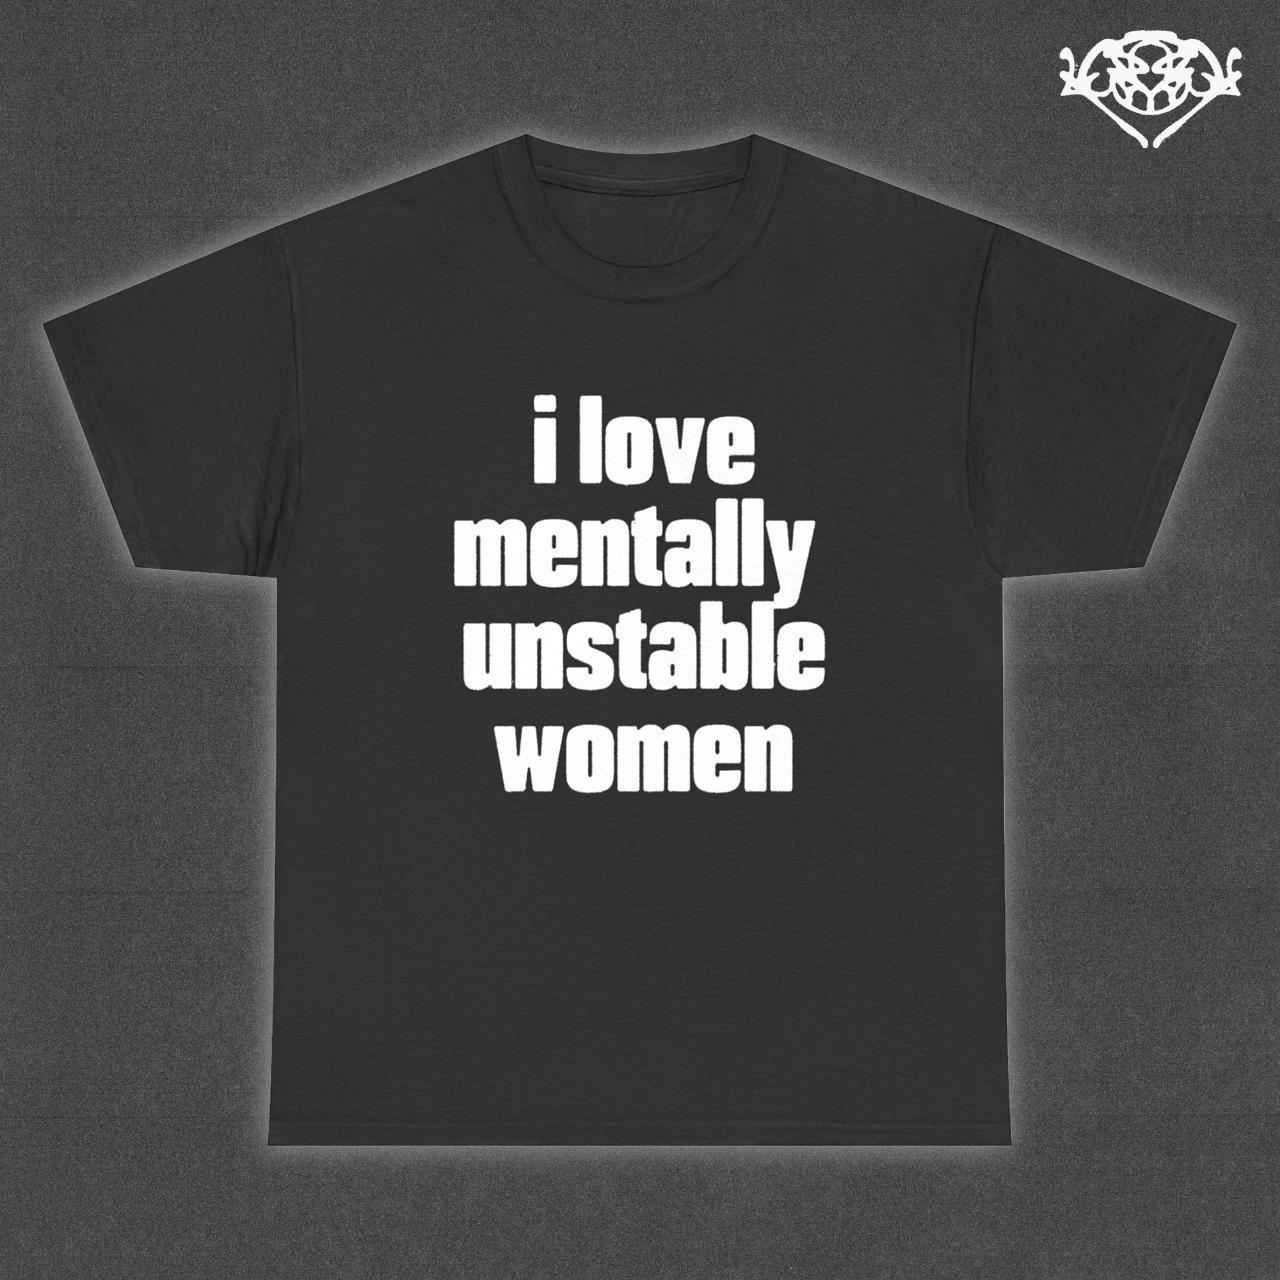 i love mentally unstable women tee! if you know,... - Depop